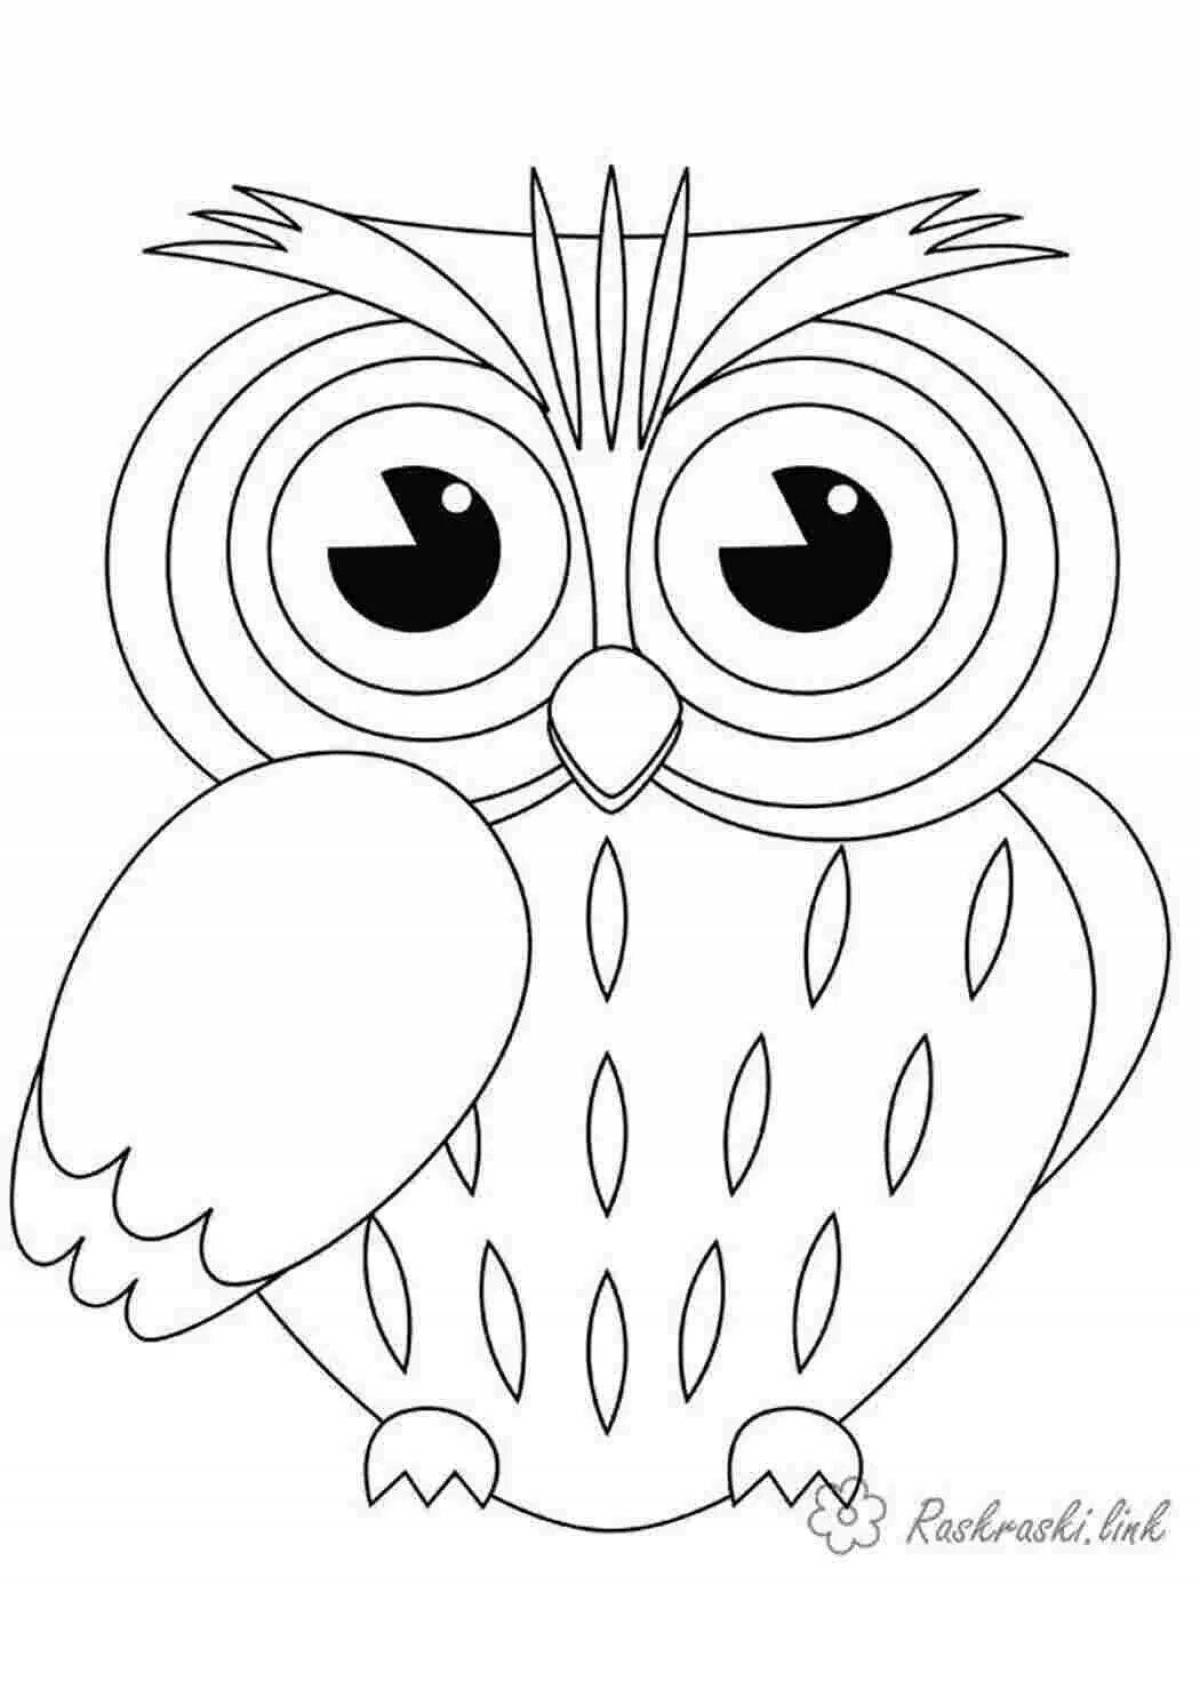 A cheerful owl coloring book for children 6-7 years old